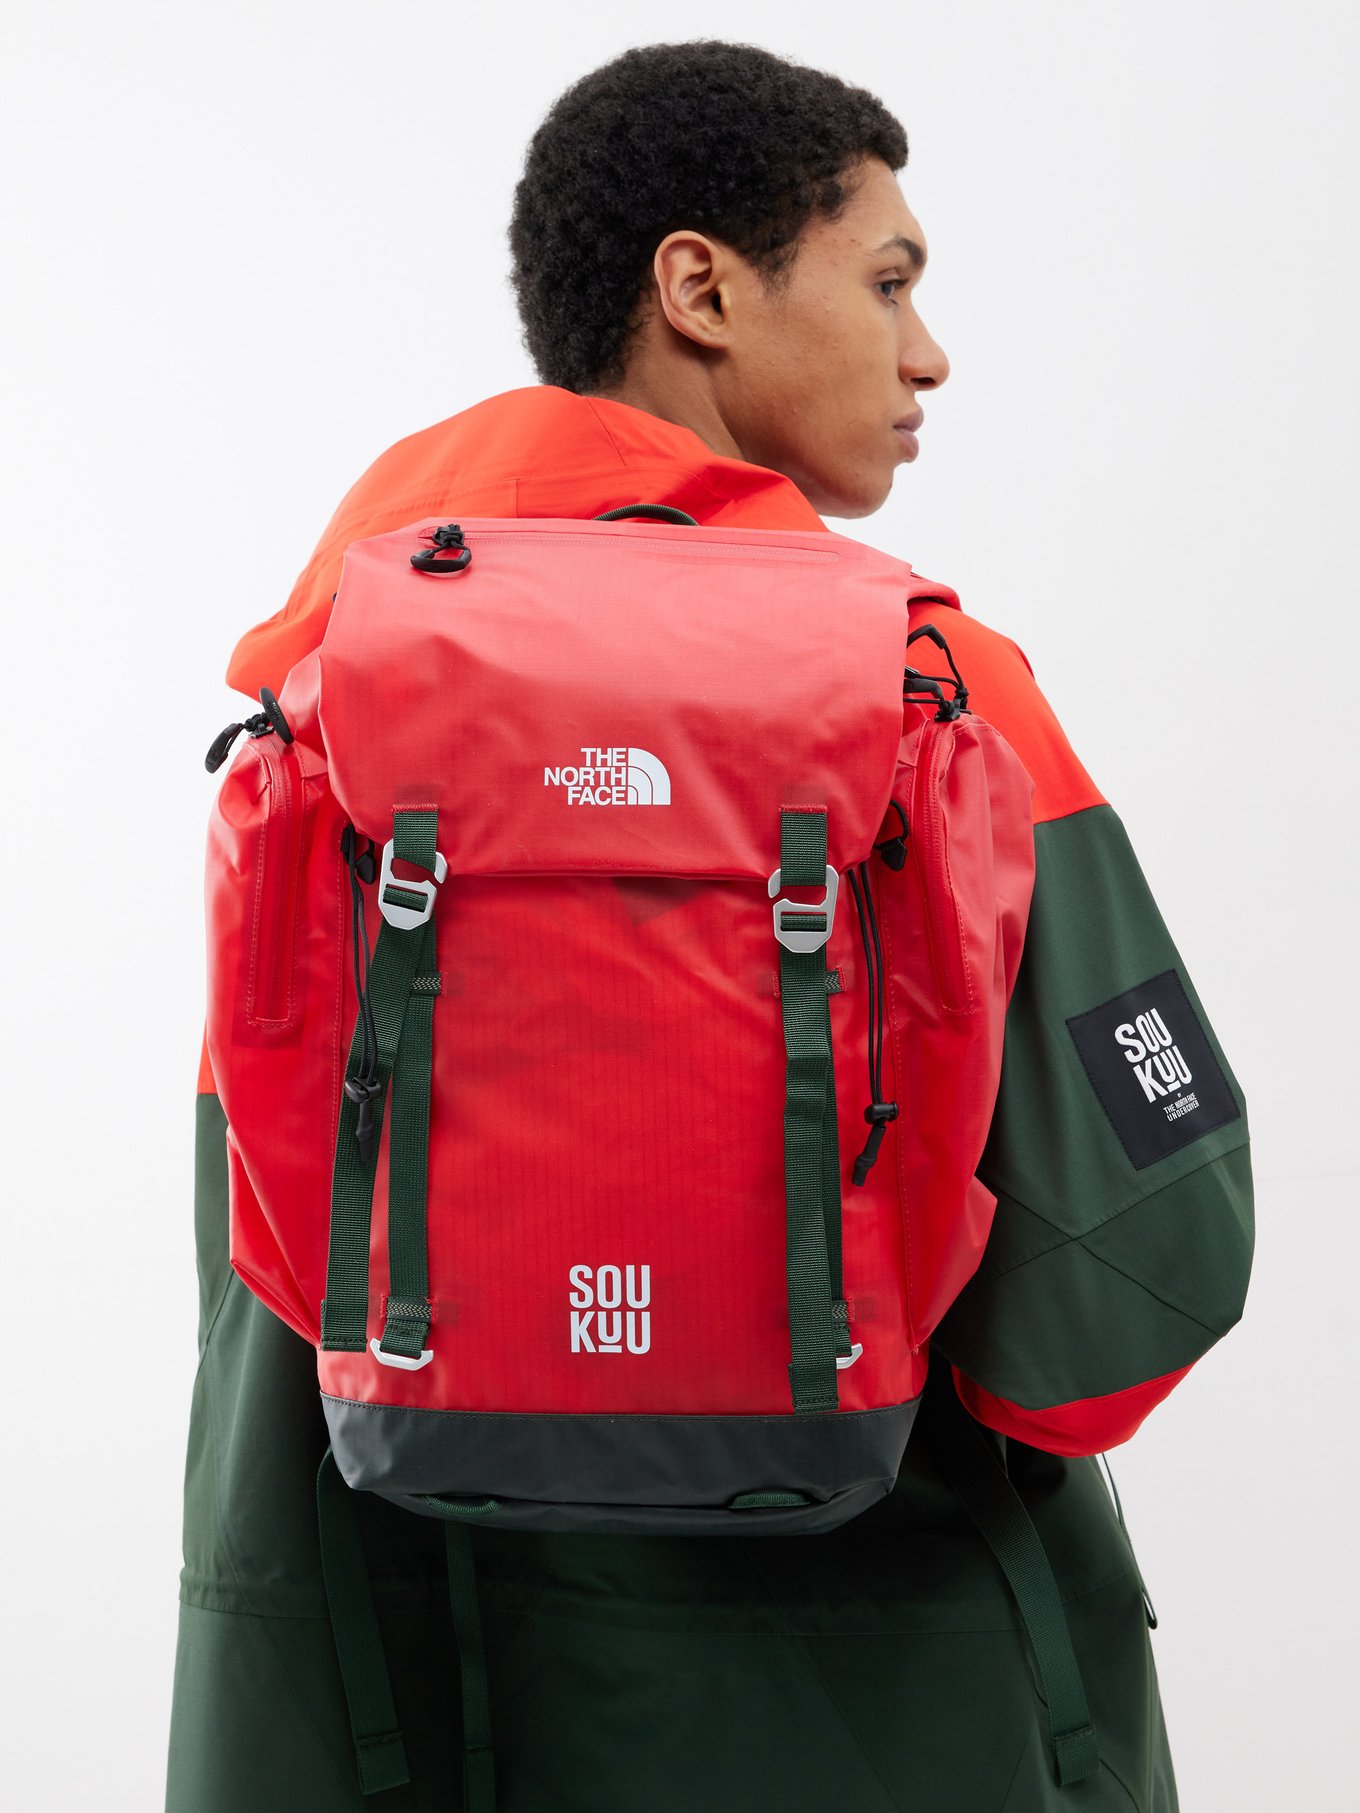 The North Face Presents Its New Ripstop Collection